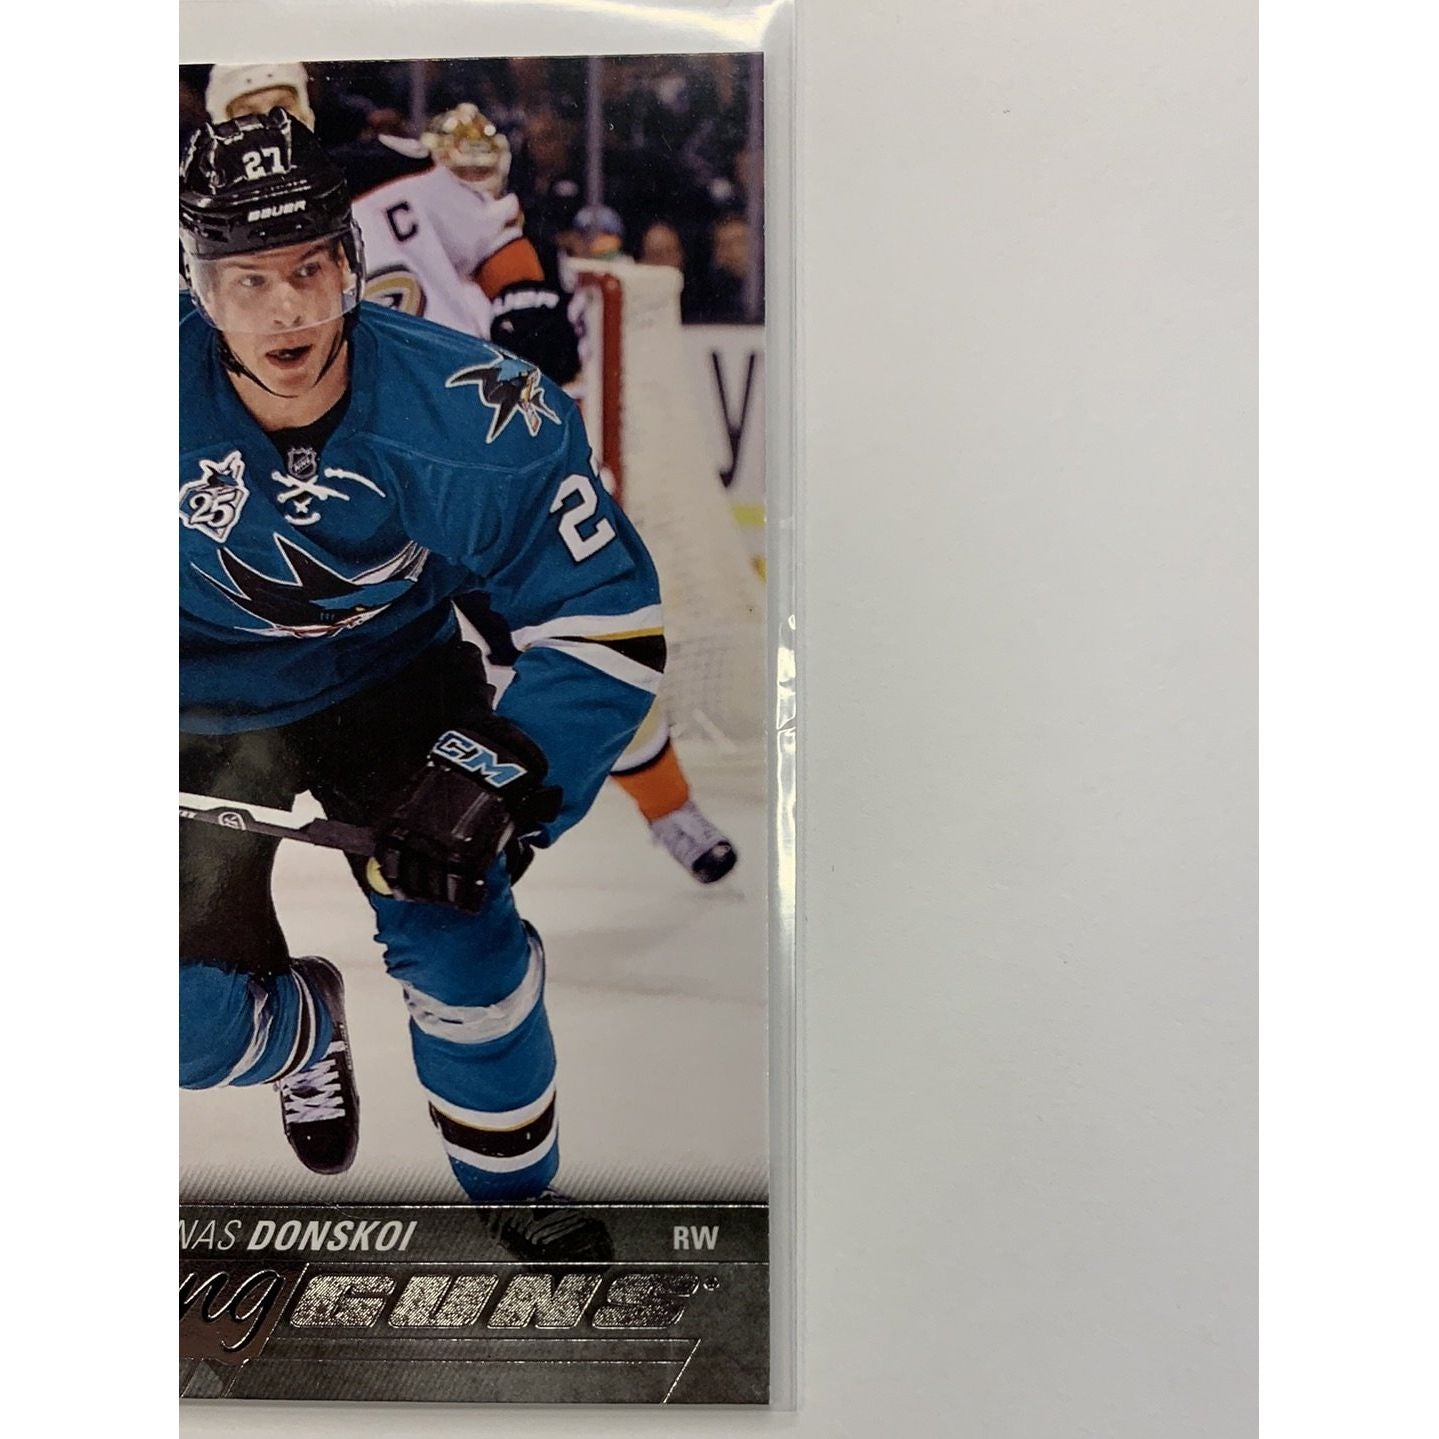  2015-16 Upper Deck Series One Joonas Donskoi Young Guns  Local Legends Cards & Collectibles